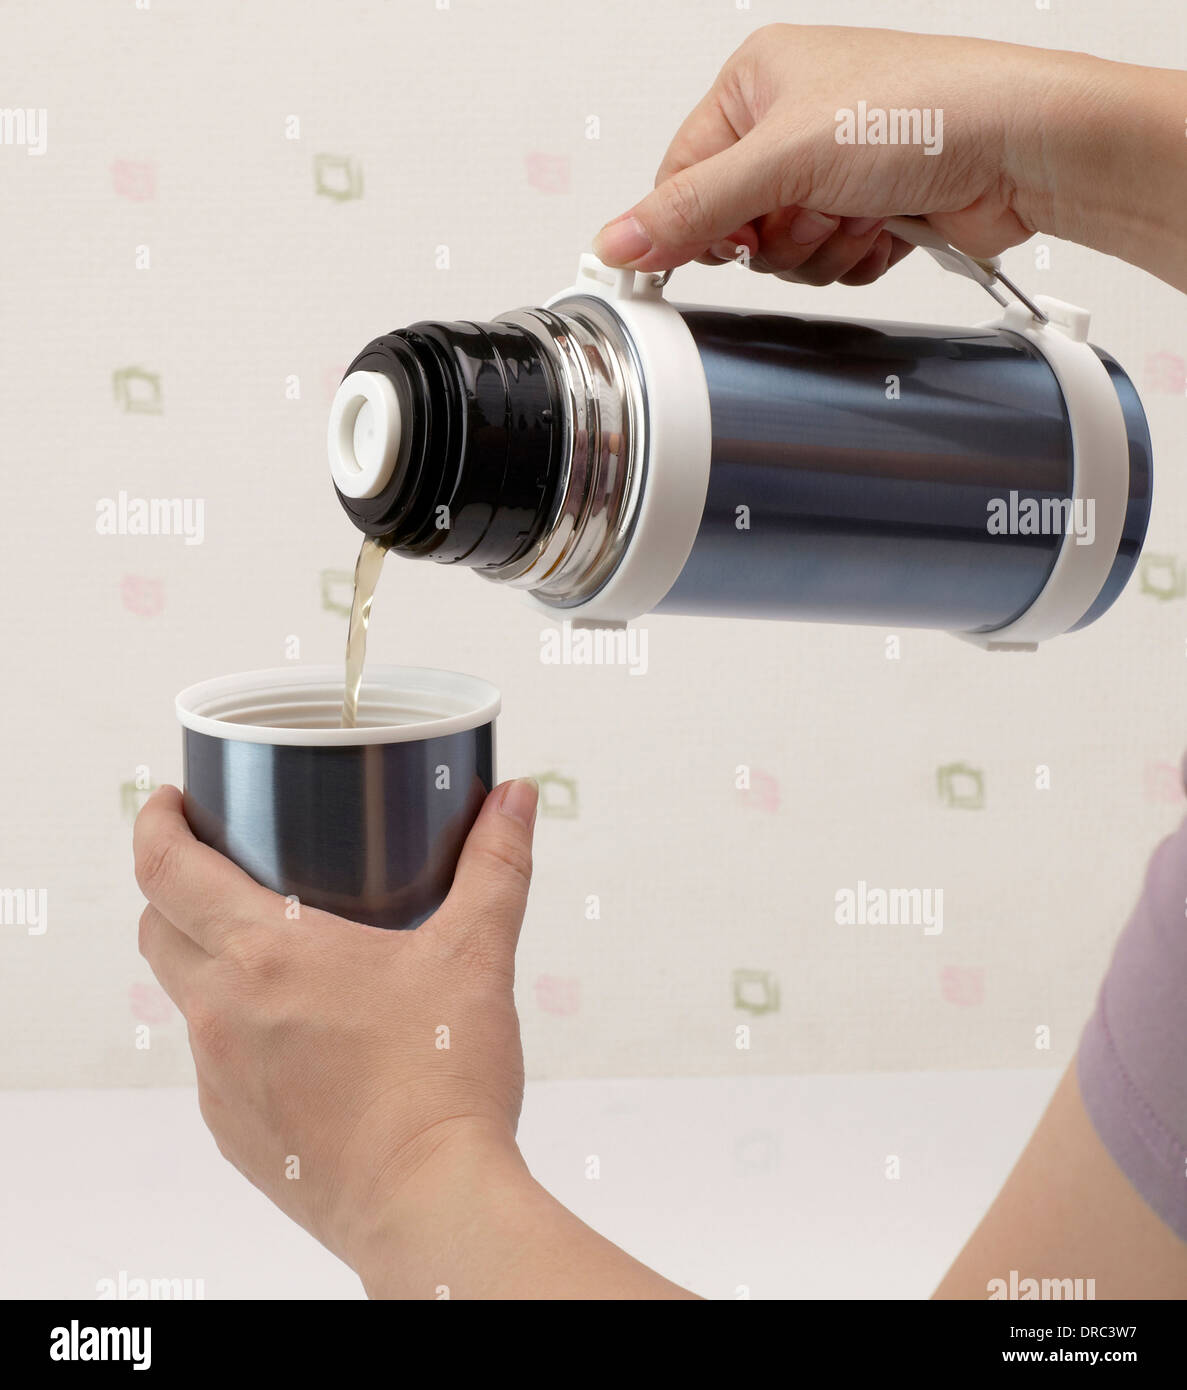 https://c8.alamy.com/comp/DRC3W7/pouring-hot-tea-from-thermos-into-cup-DRC3W7.jpg